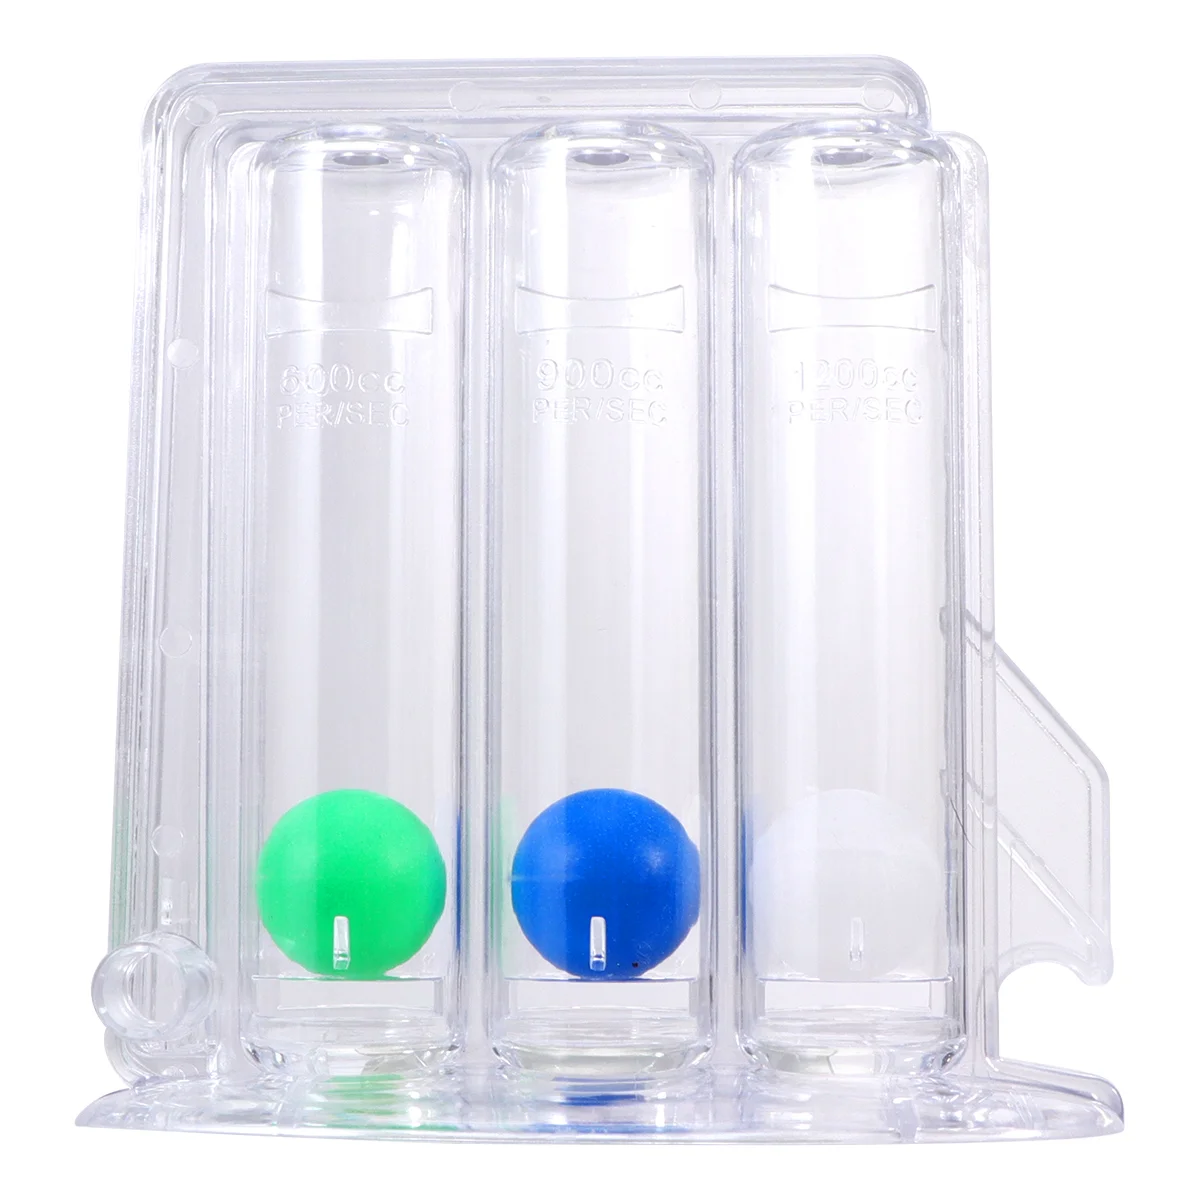 

Incentive Spirometer Rehabilitation Trainer One Piece Lung Breathing Exerciser Vital Capacity Breathing Trainer